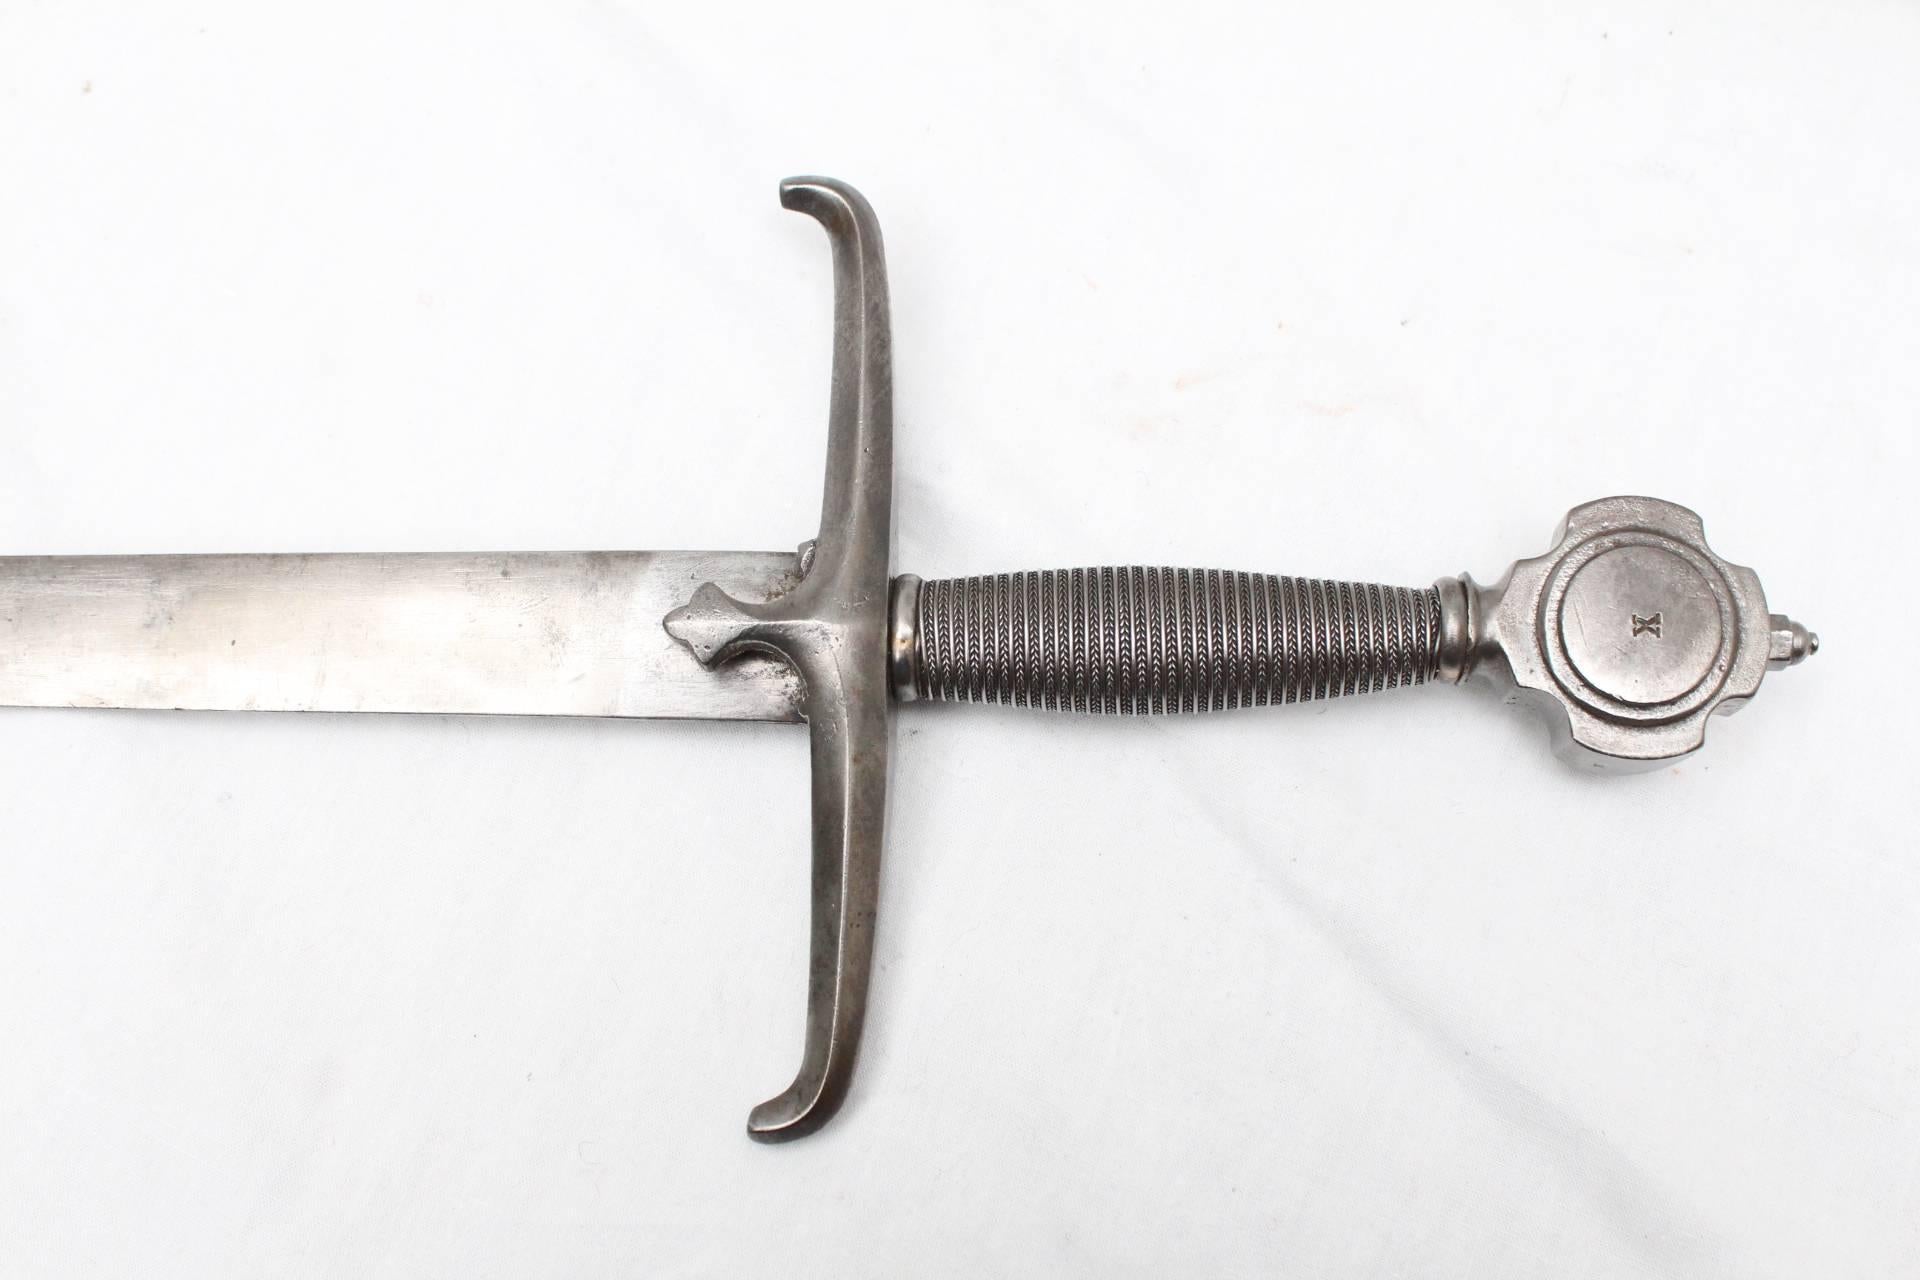 Sword in medieval style
19th Century 
France

This piece was part of a collection. 

More models available, please contact us for any further information. 